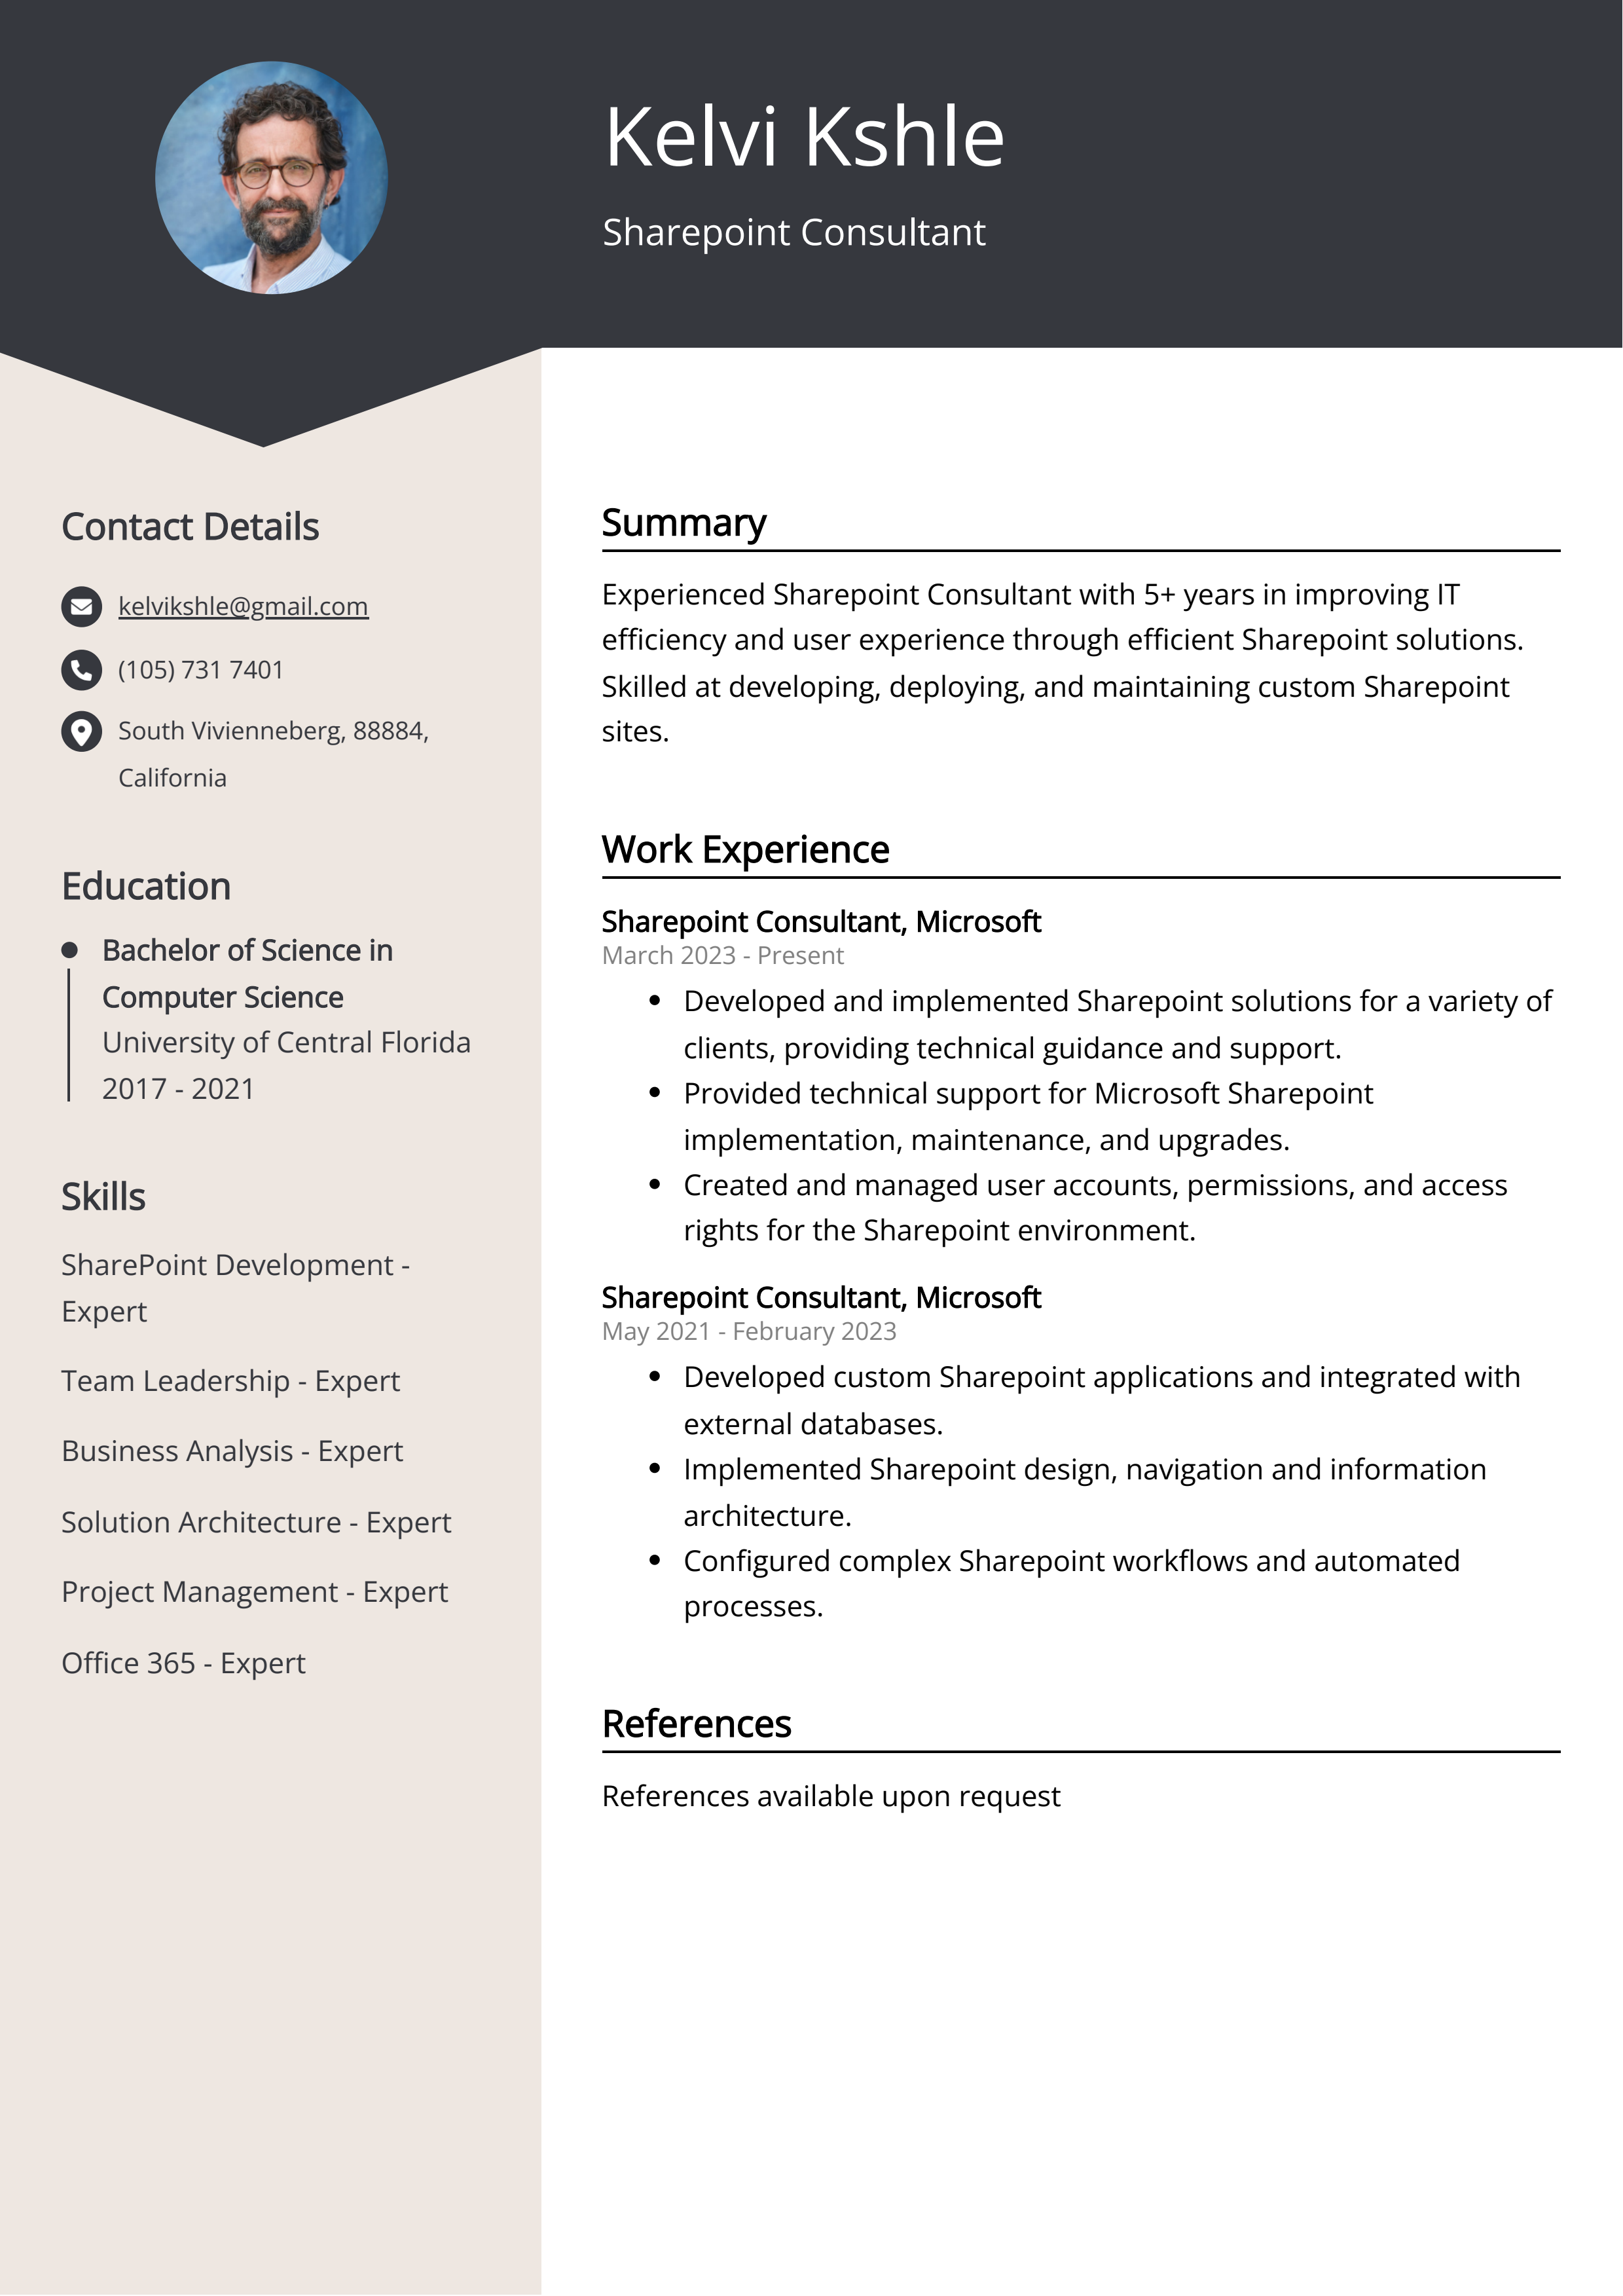 Sharepoint Consultant CV Example